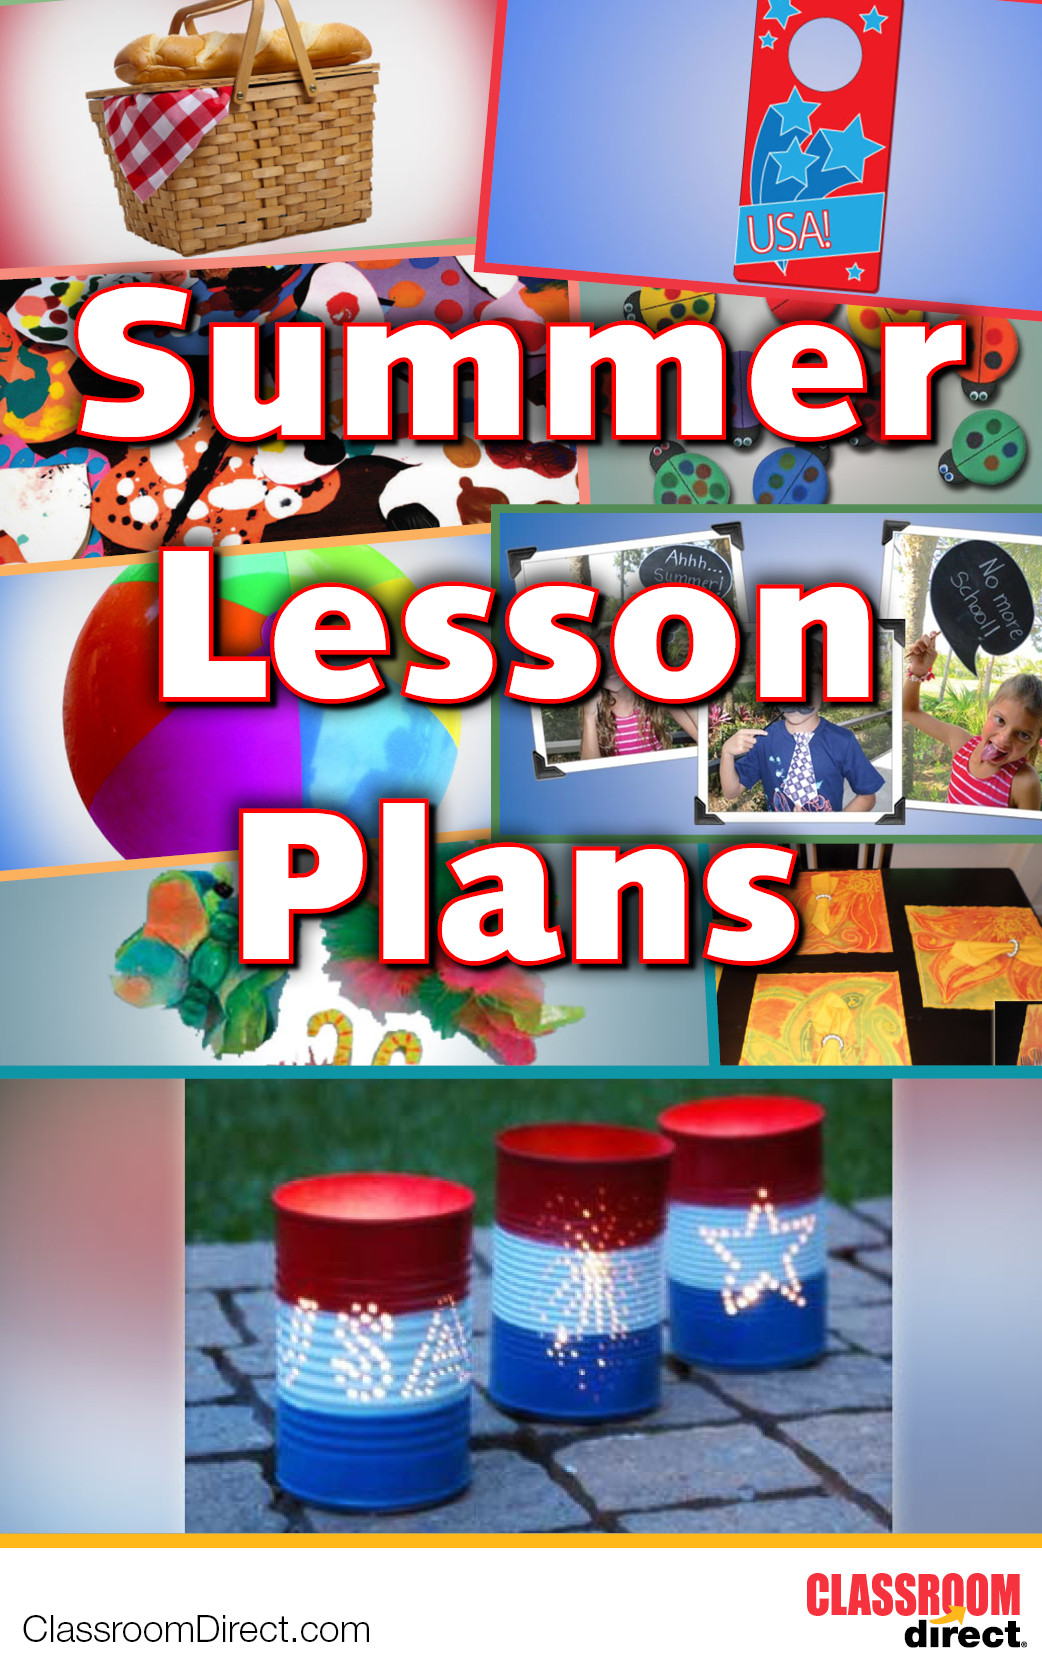 Summer Lesson Plans for Preschoolers Perfect Lesson Plans for Summer